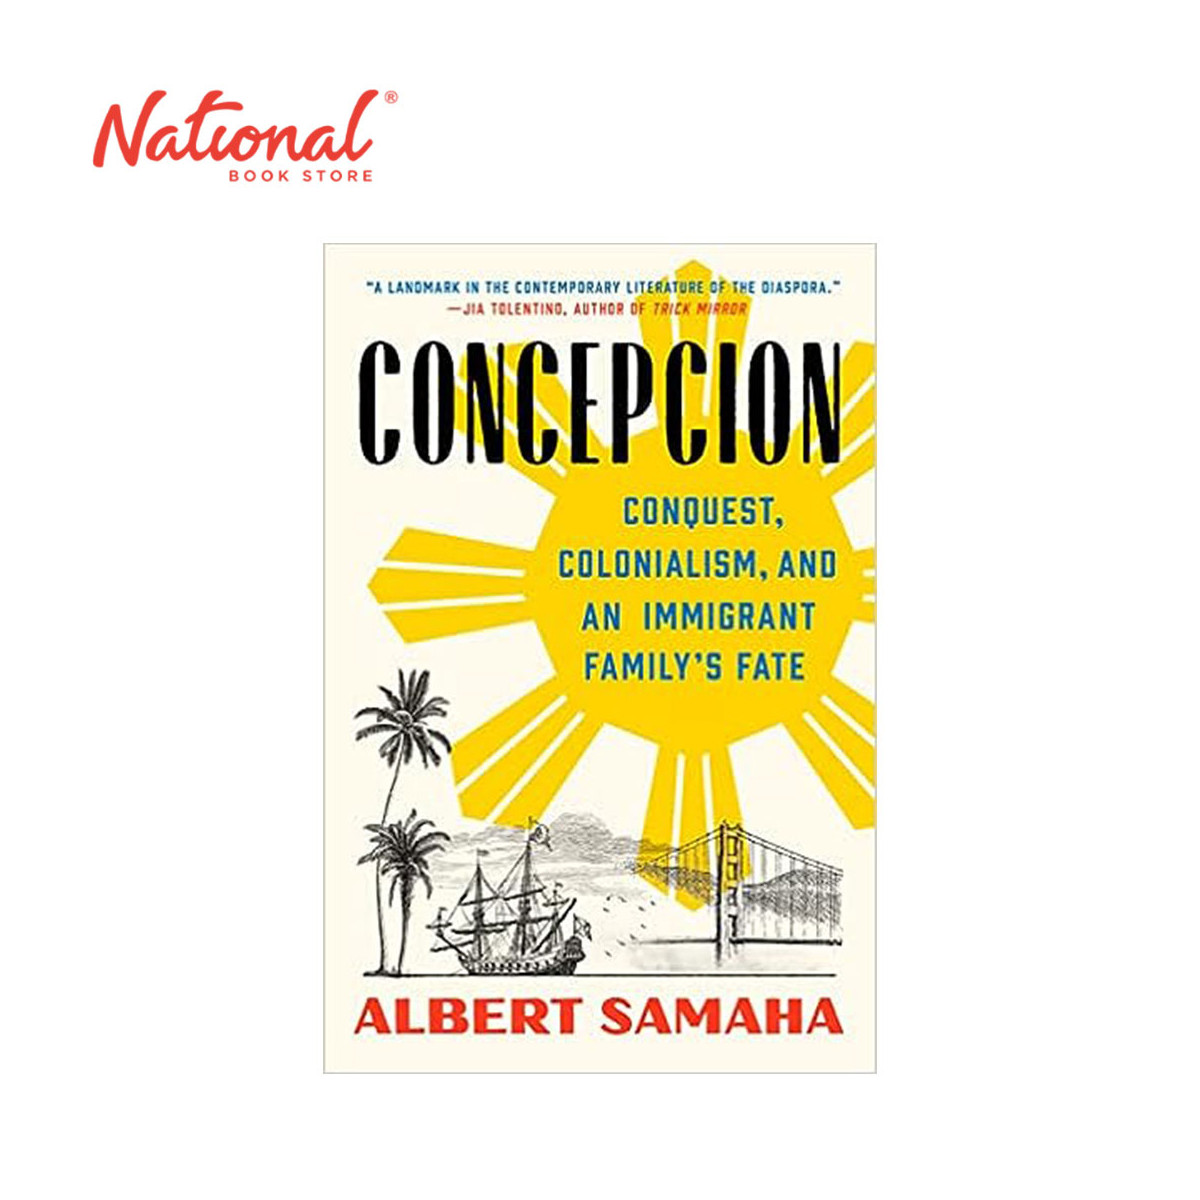 *SPECIAL ORDER* Concepcion: Conquest, Colonialism, and an Immigrant Family's Fate by Albert Samaha - Trade Paperback